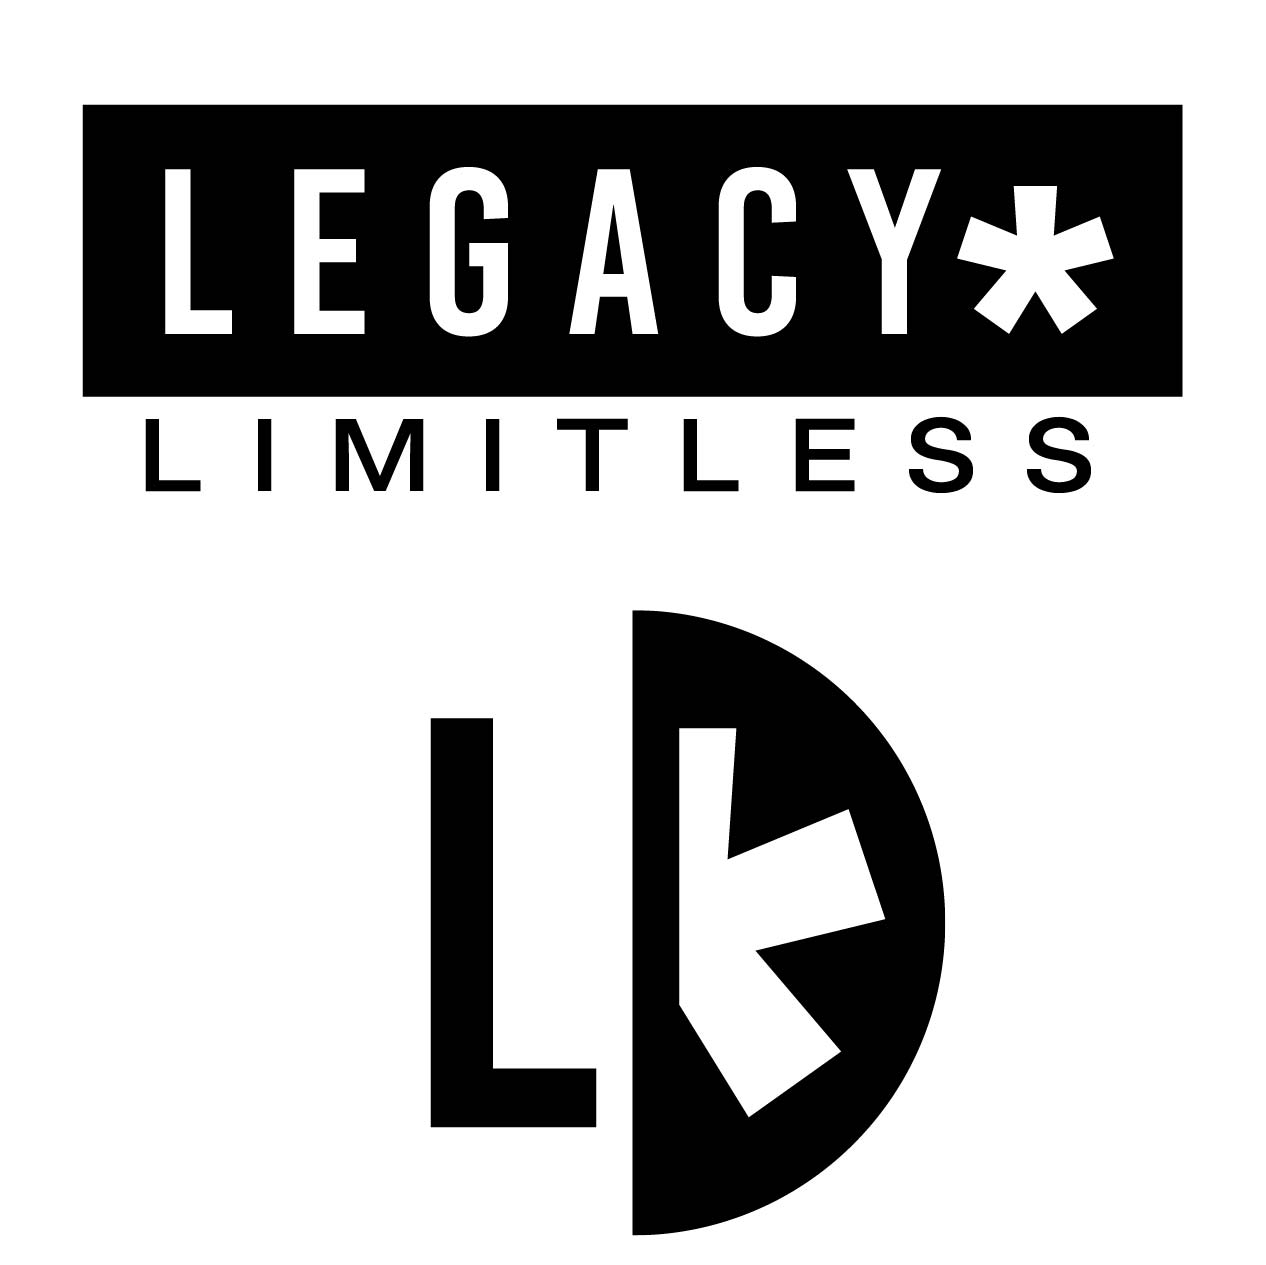 Black and White Legacy Limitless Logo with an asterisk besite it.